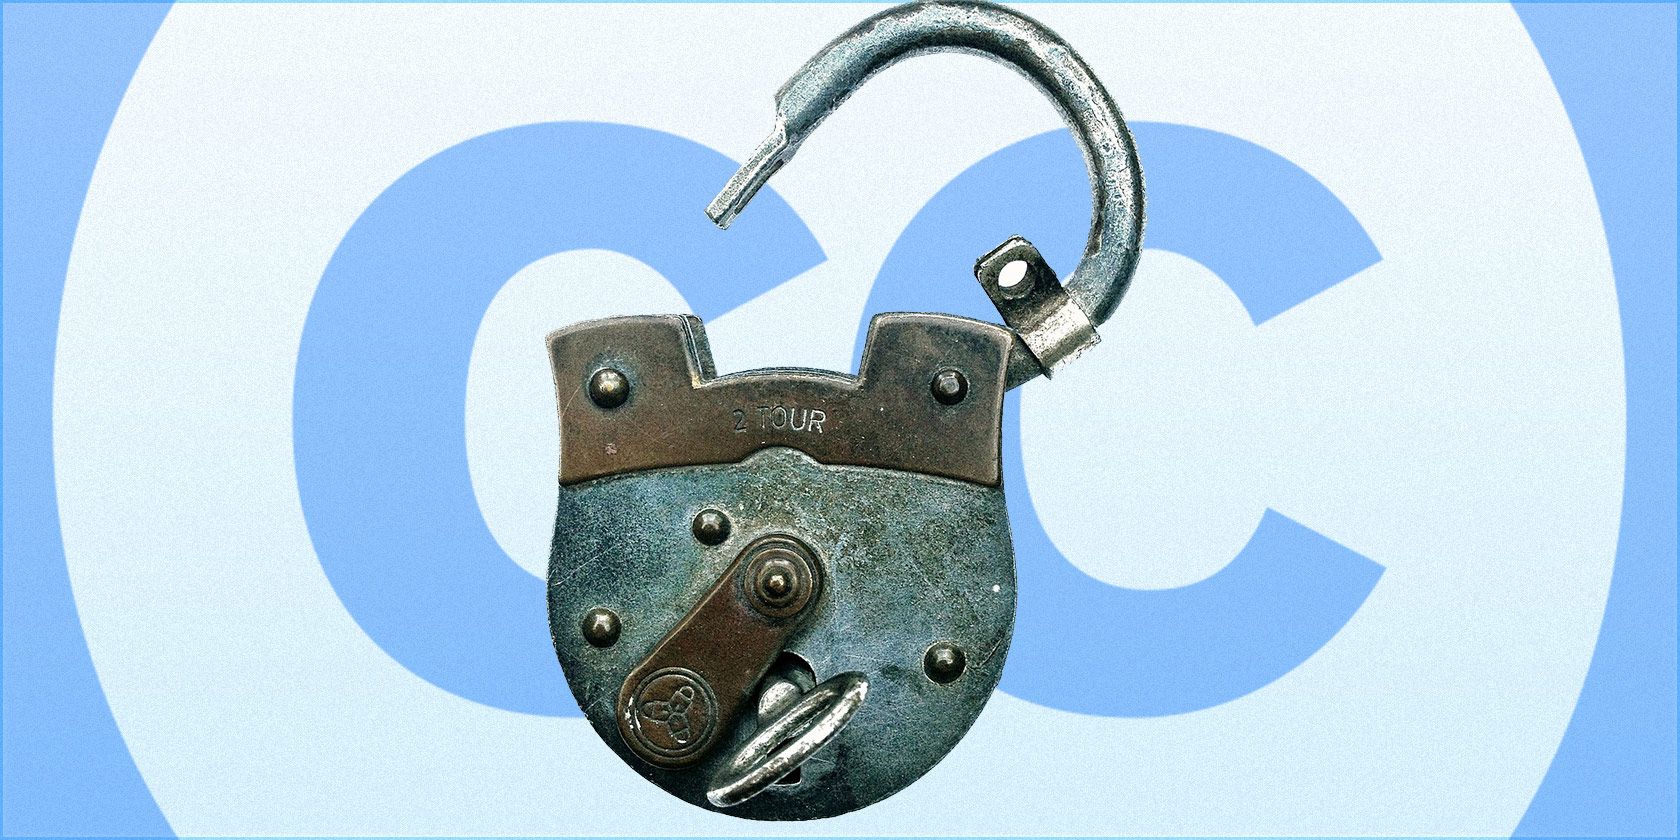 Padlock opened on a background of the Creative Commons logo